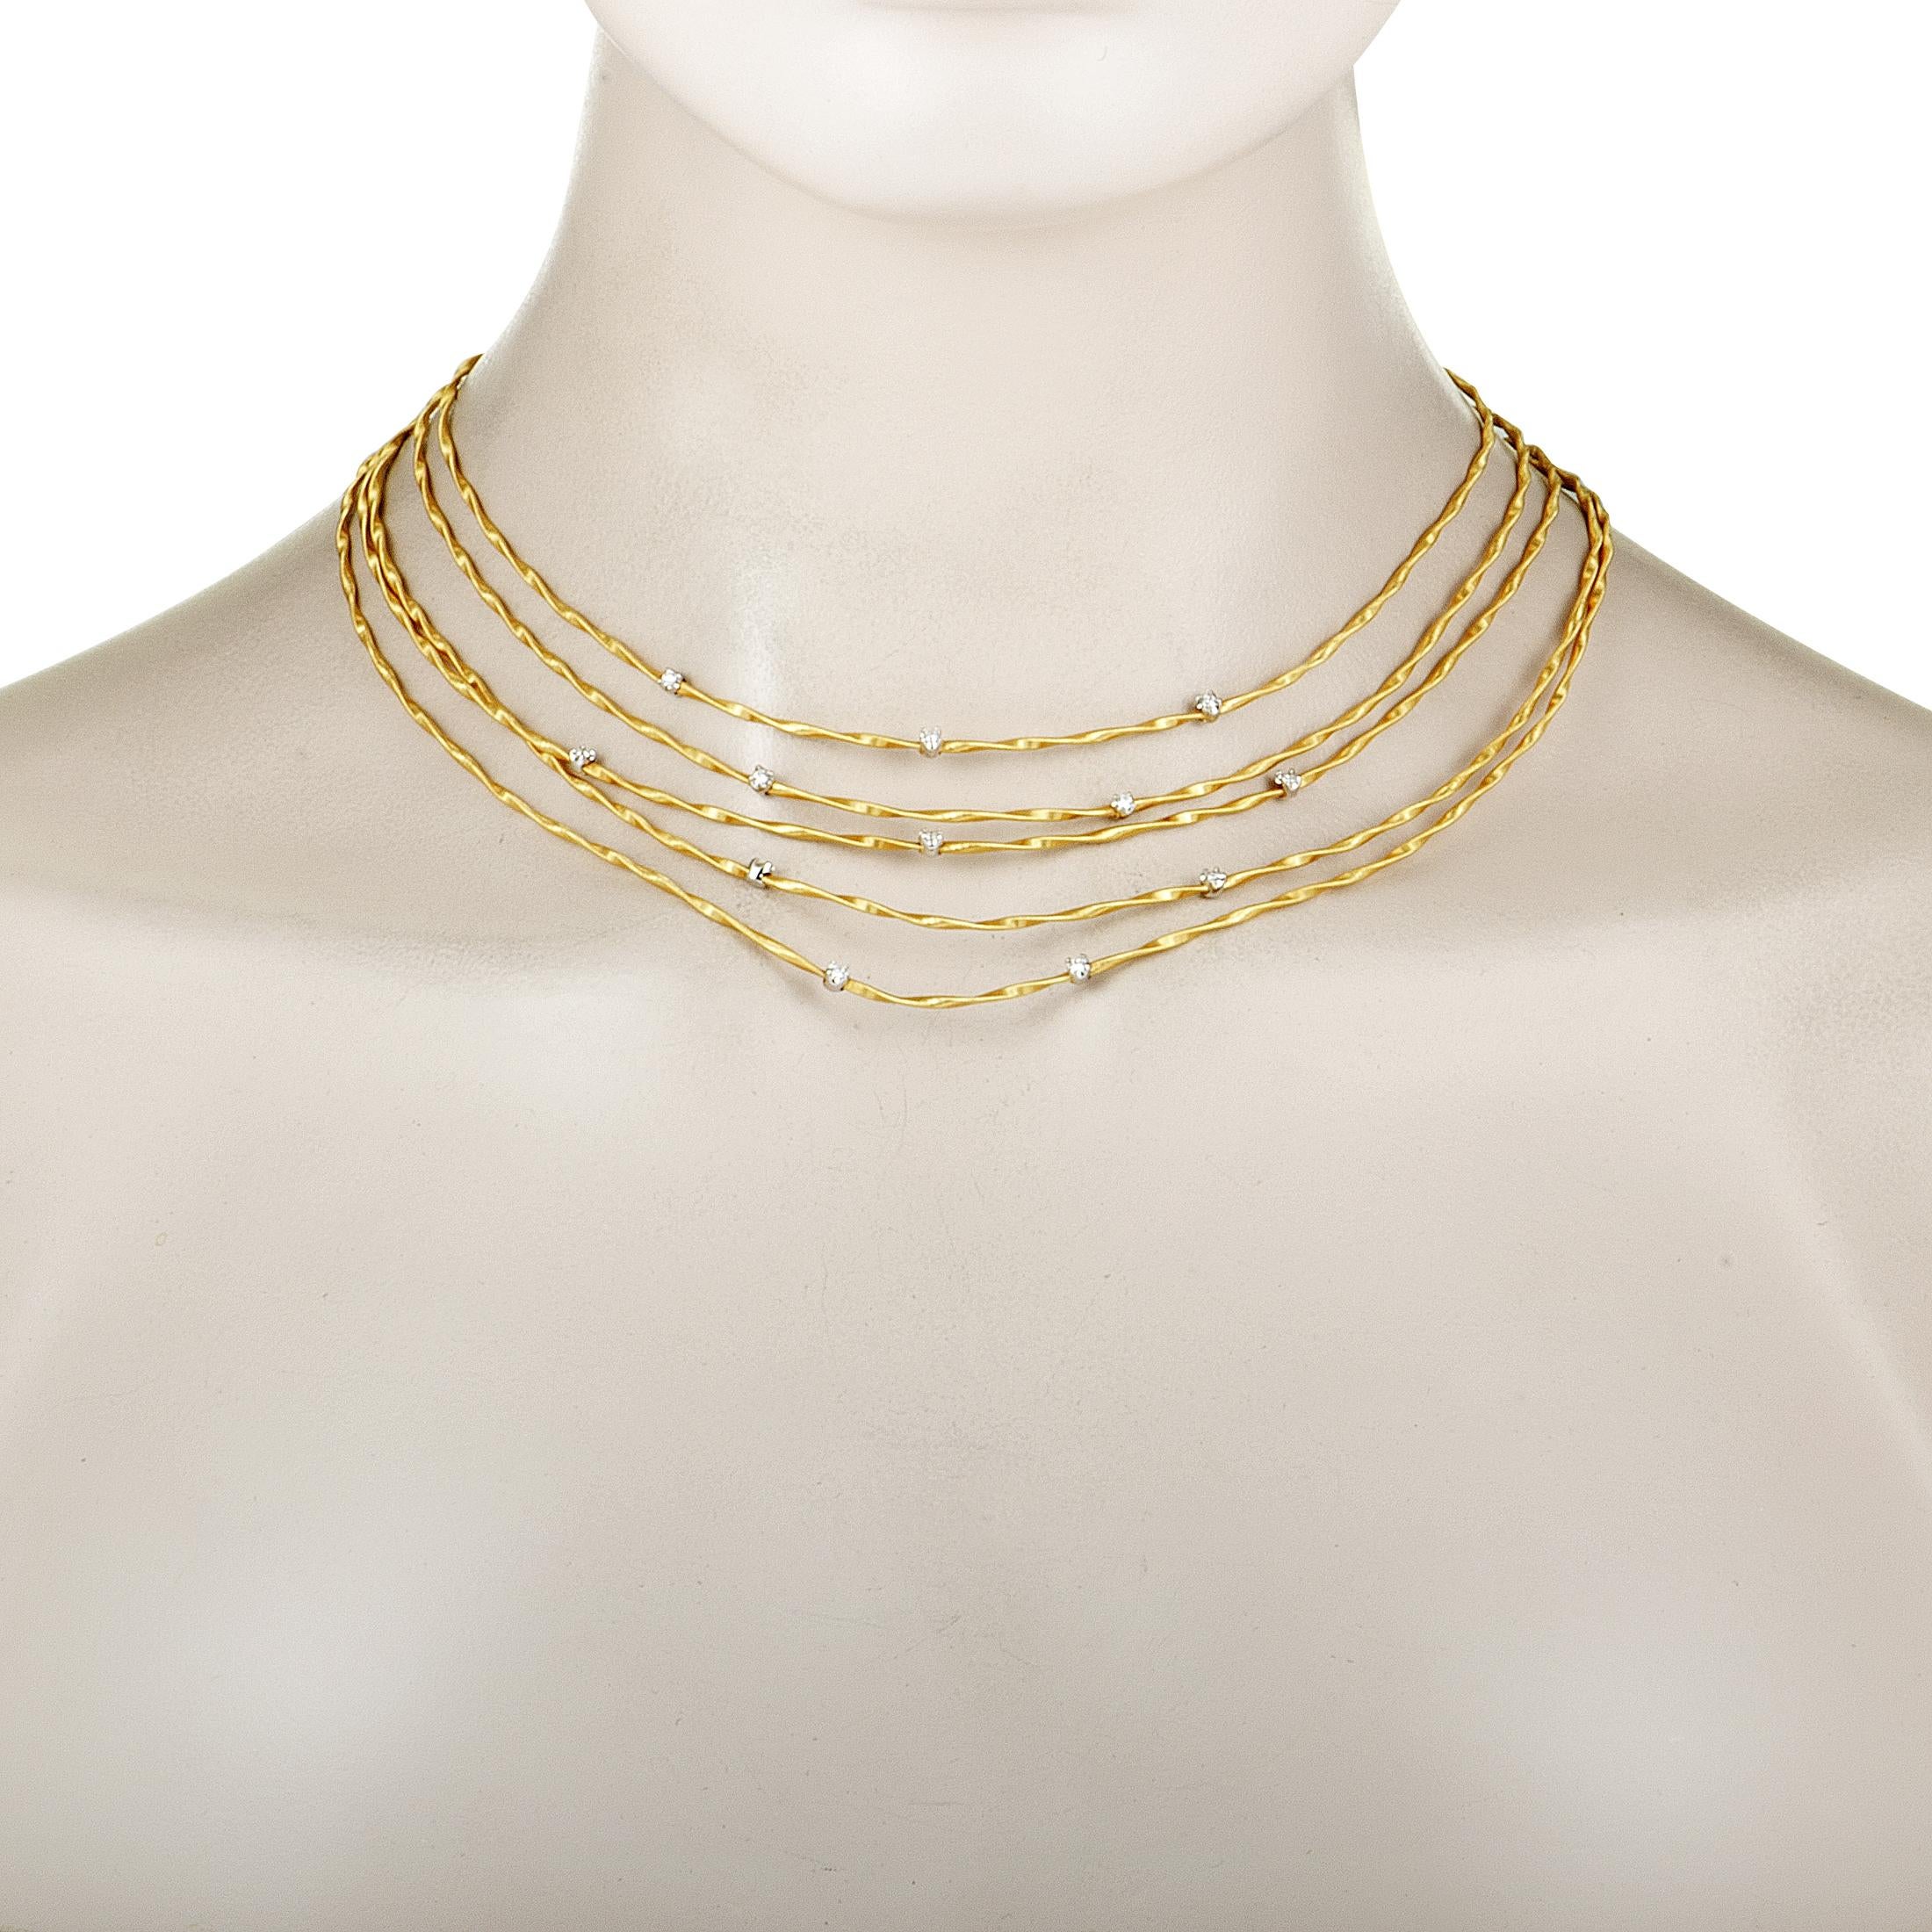 If you wish to add to your look a splendidly elegant touch of understated refinement then this sublime Marco Bicego necklace is an exceptional choice. Created for the wonderful “Marrakech” collection, the necklace is made of 18K yellow and 18K white